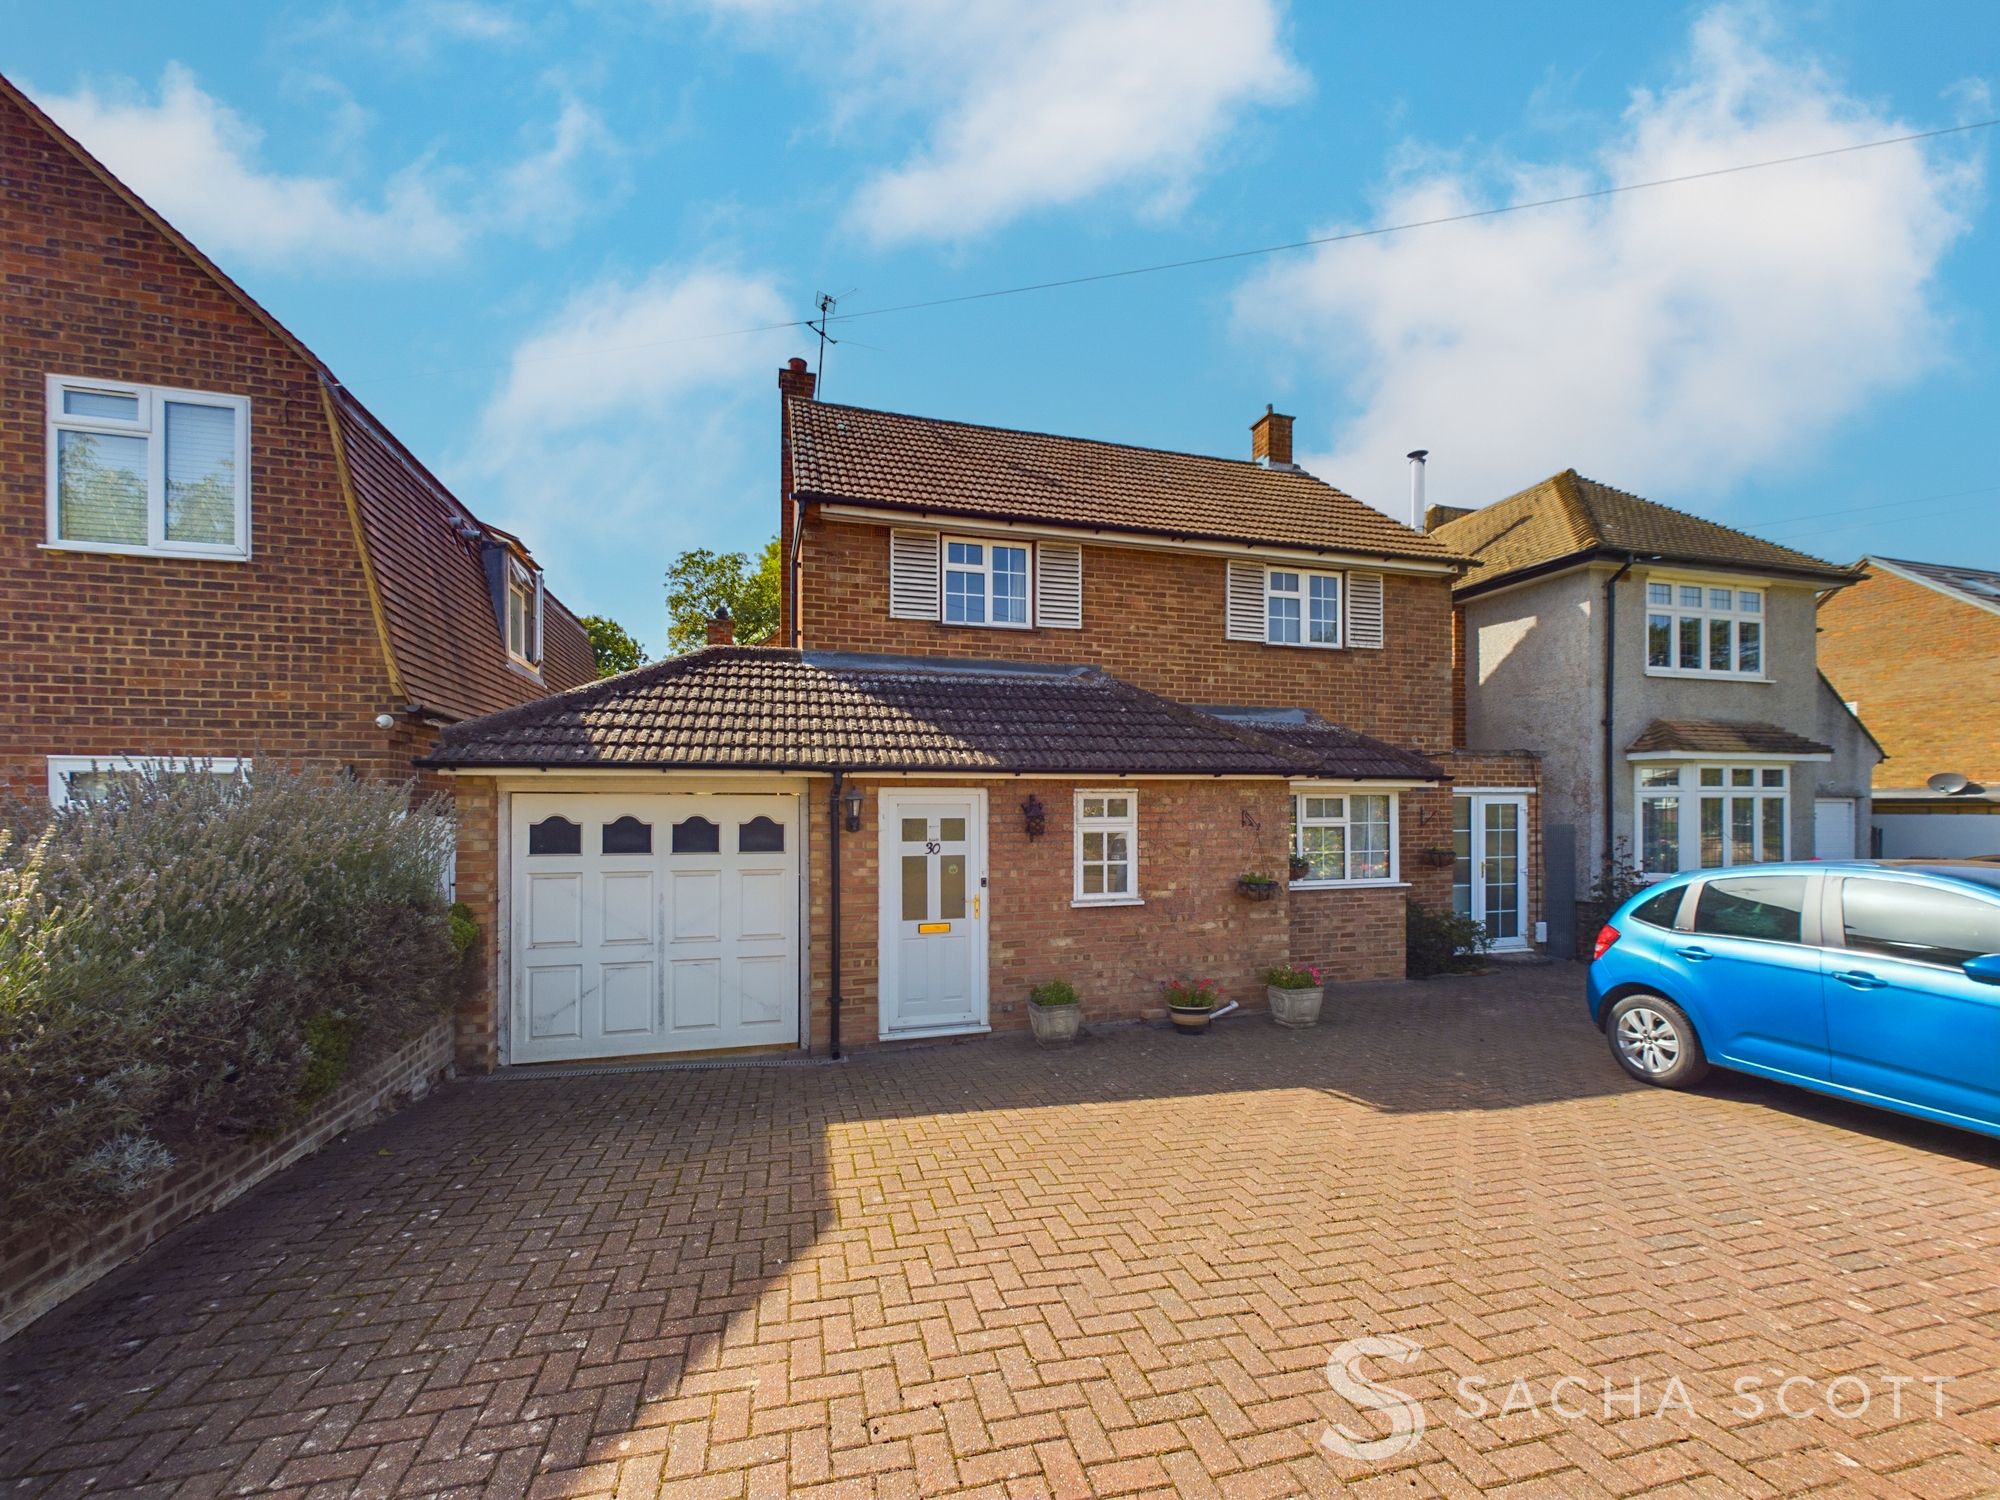 4 bed detached house for sale in The Spinney, Epsom - Property Image 1